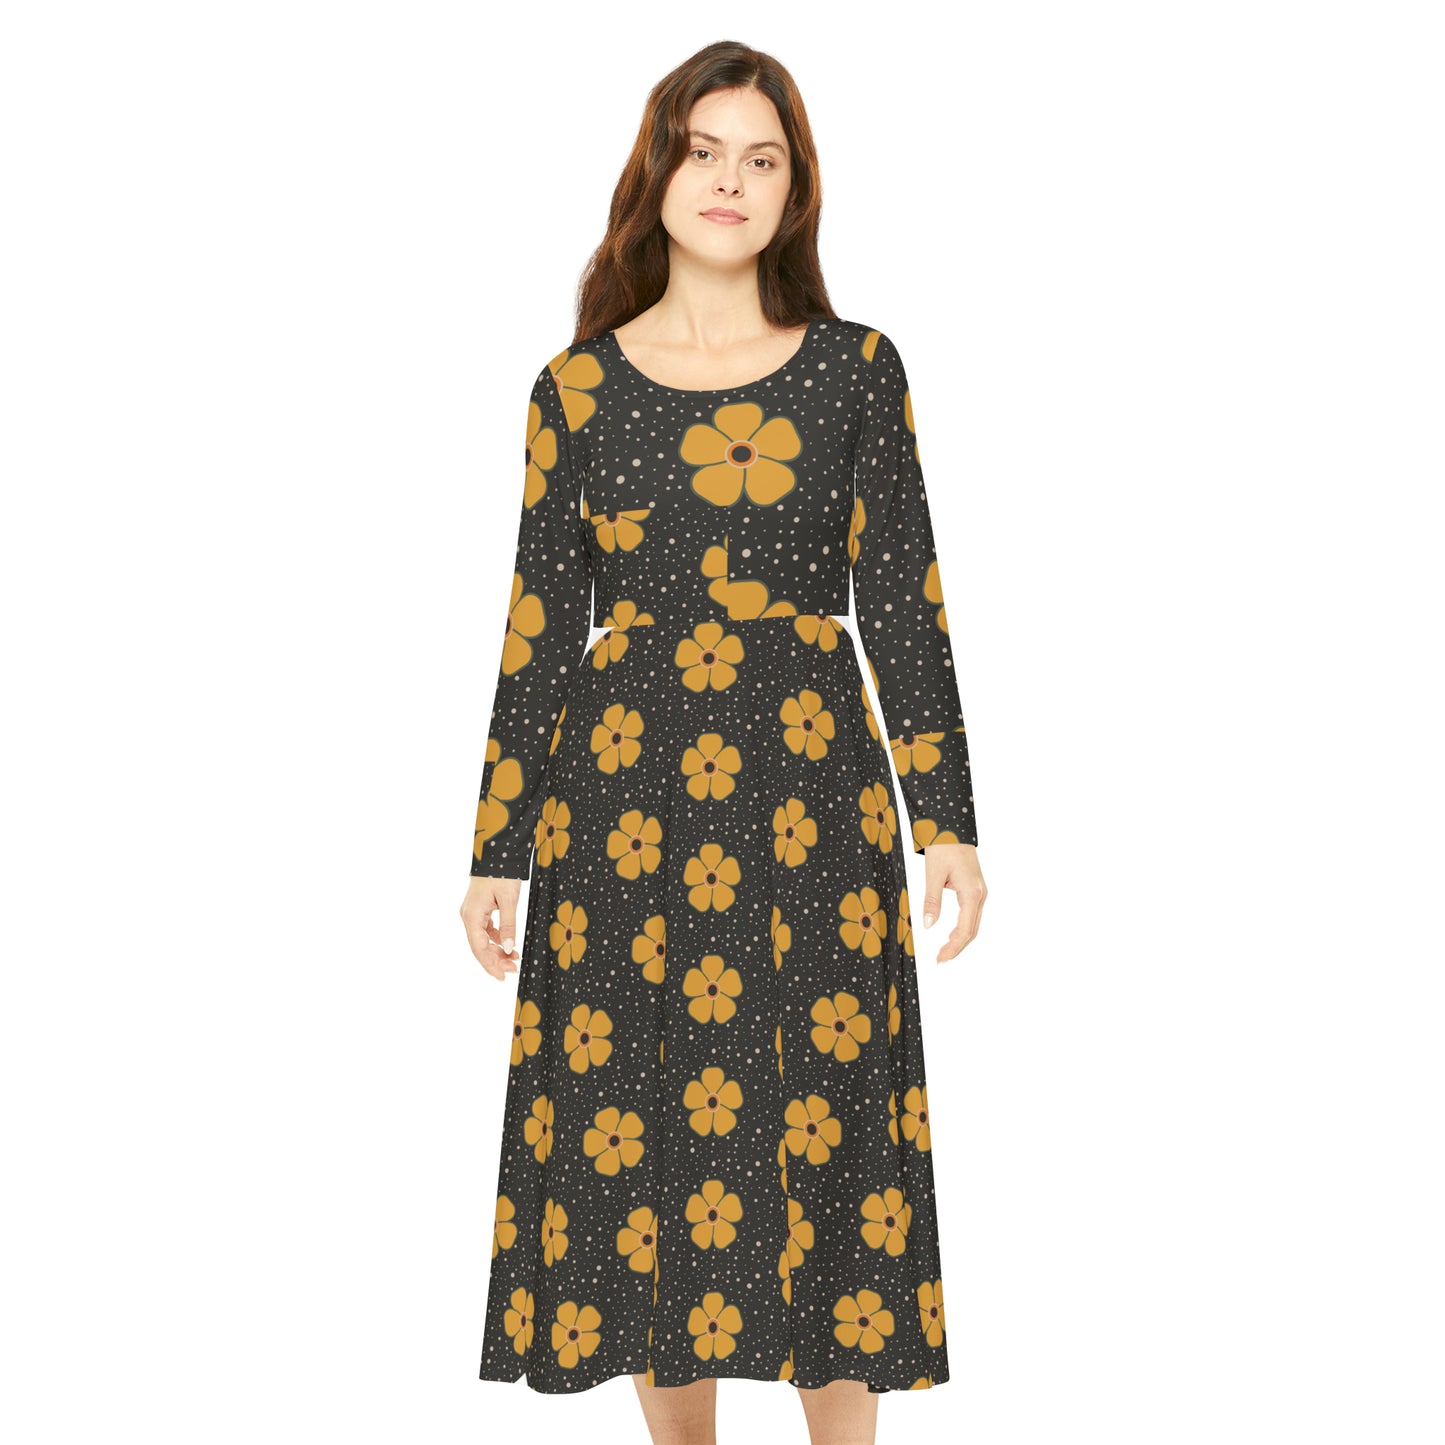 Black Dress Yellow Flowers-Long Sleeve Dress Collection